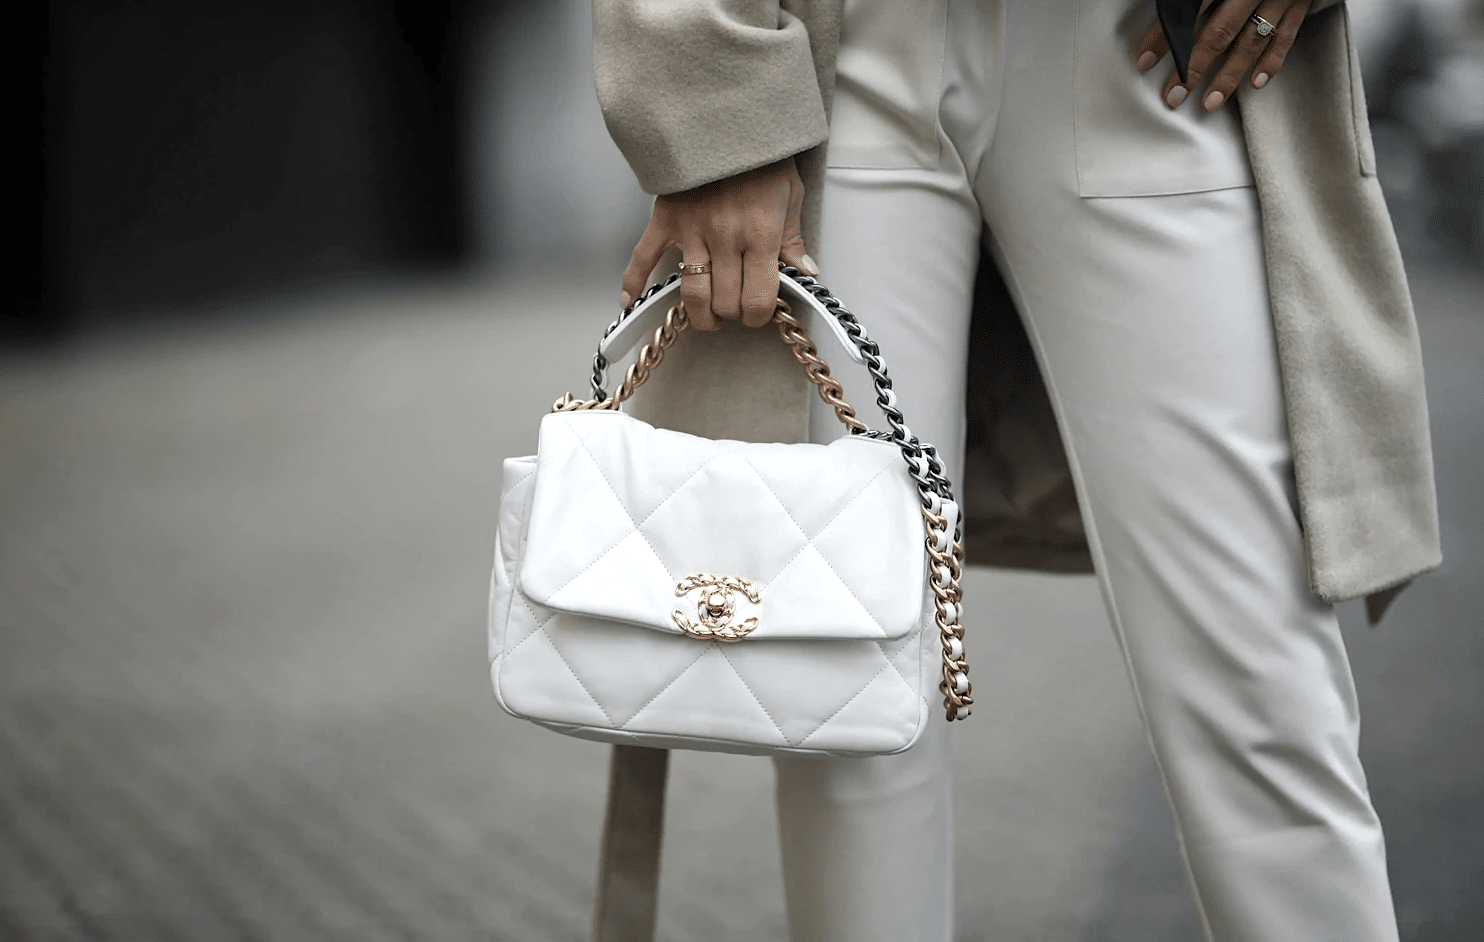 Is The Chanel 19 A New Classic? A Review on The Price, Size and History